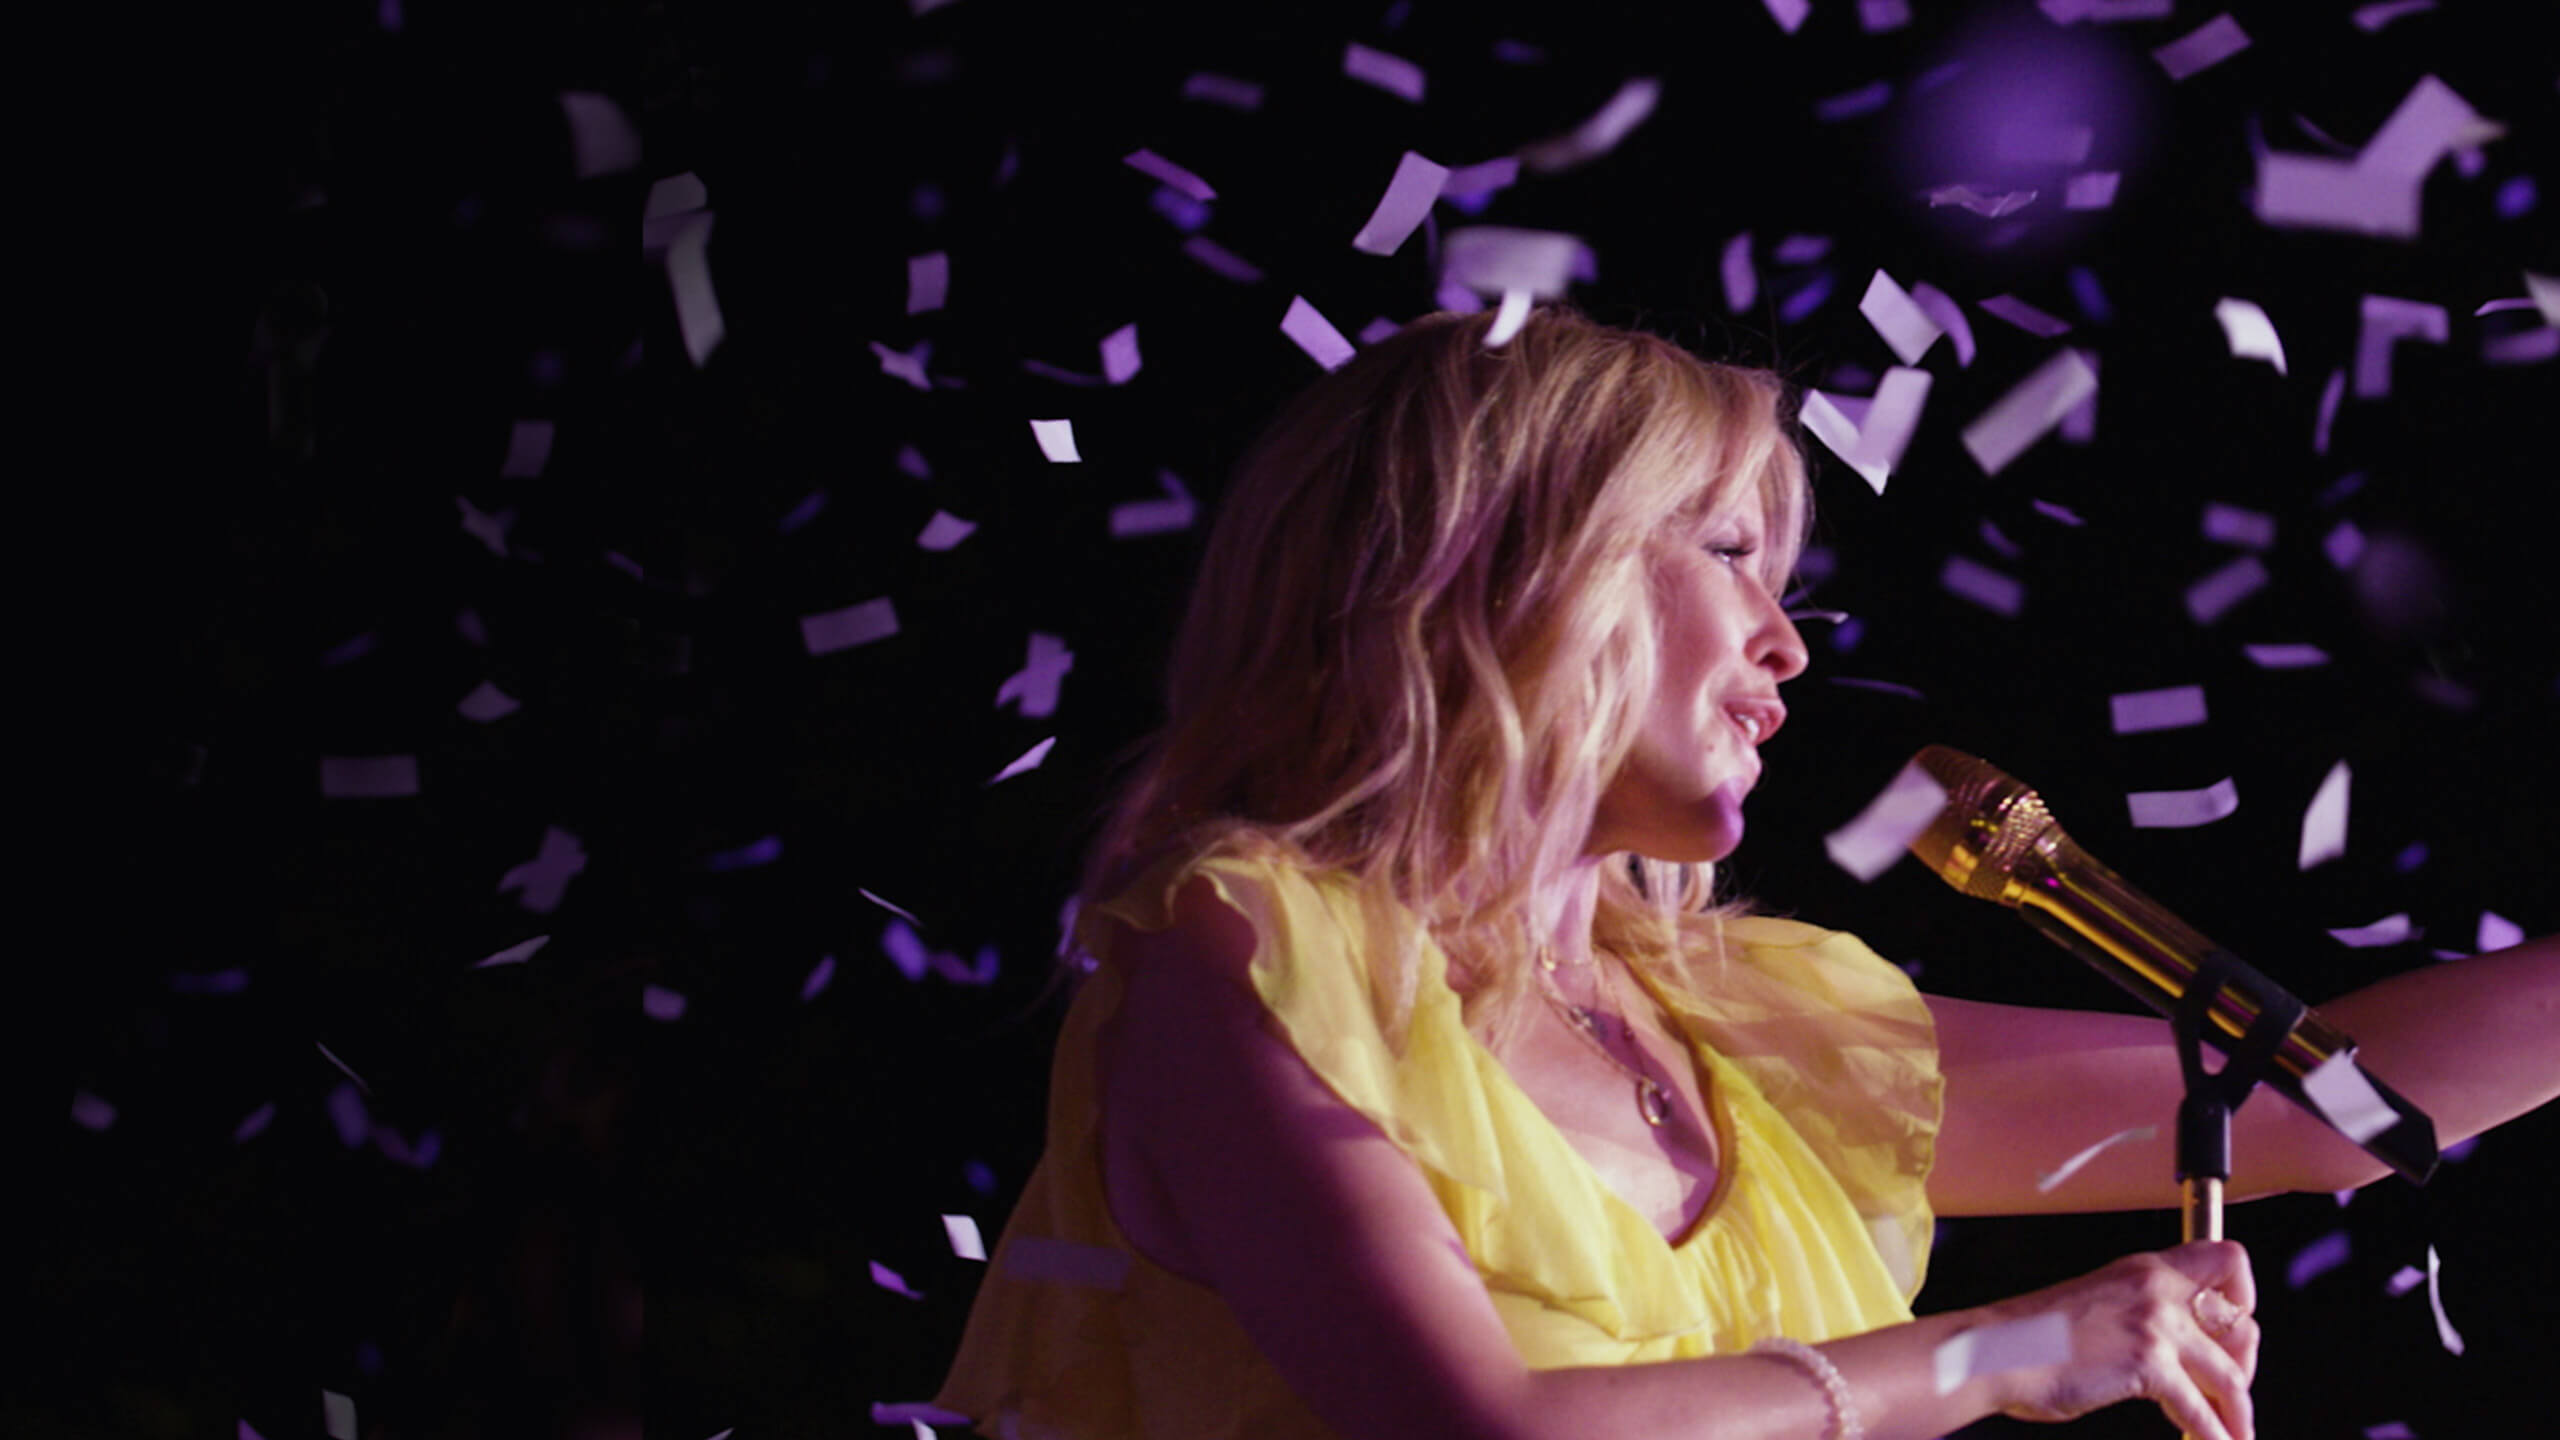 Kylie Minogue singing at night surrounded by confetti, from an event videos project for News UK